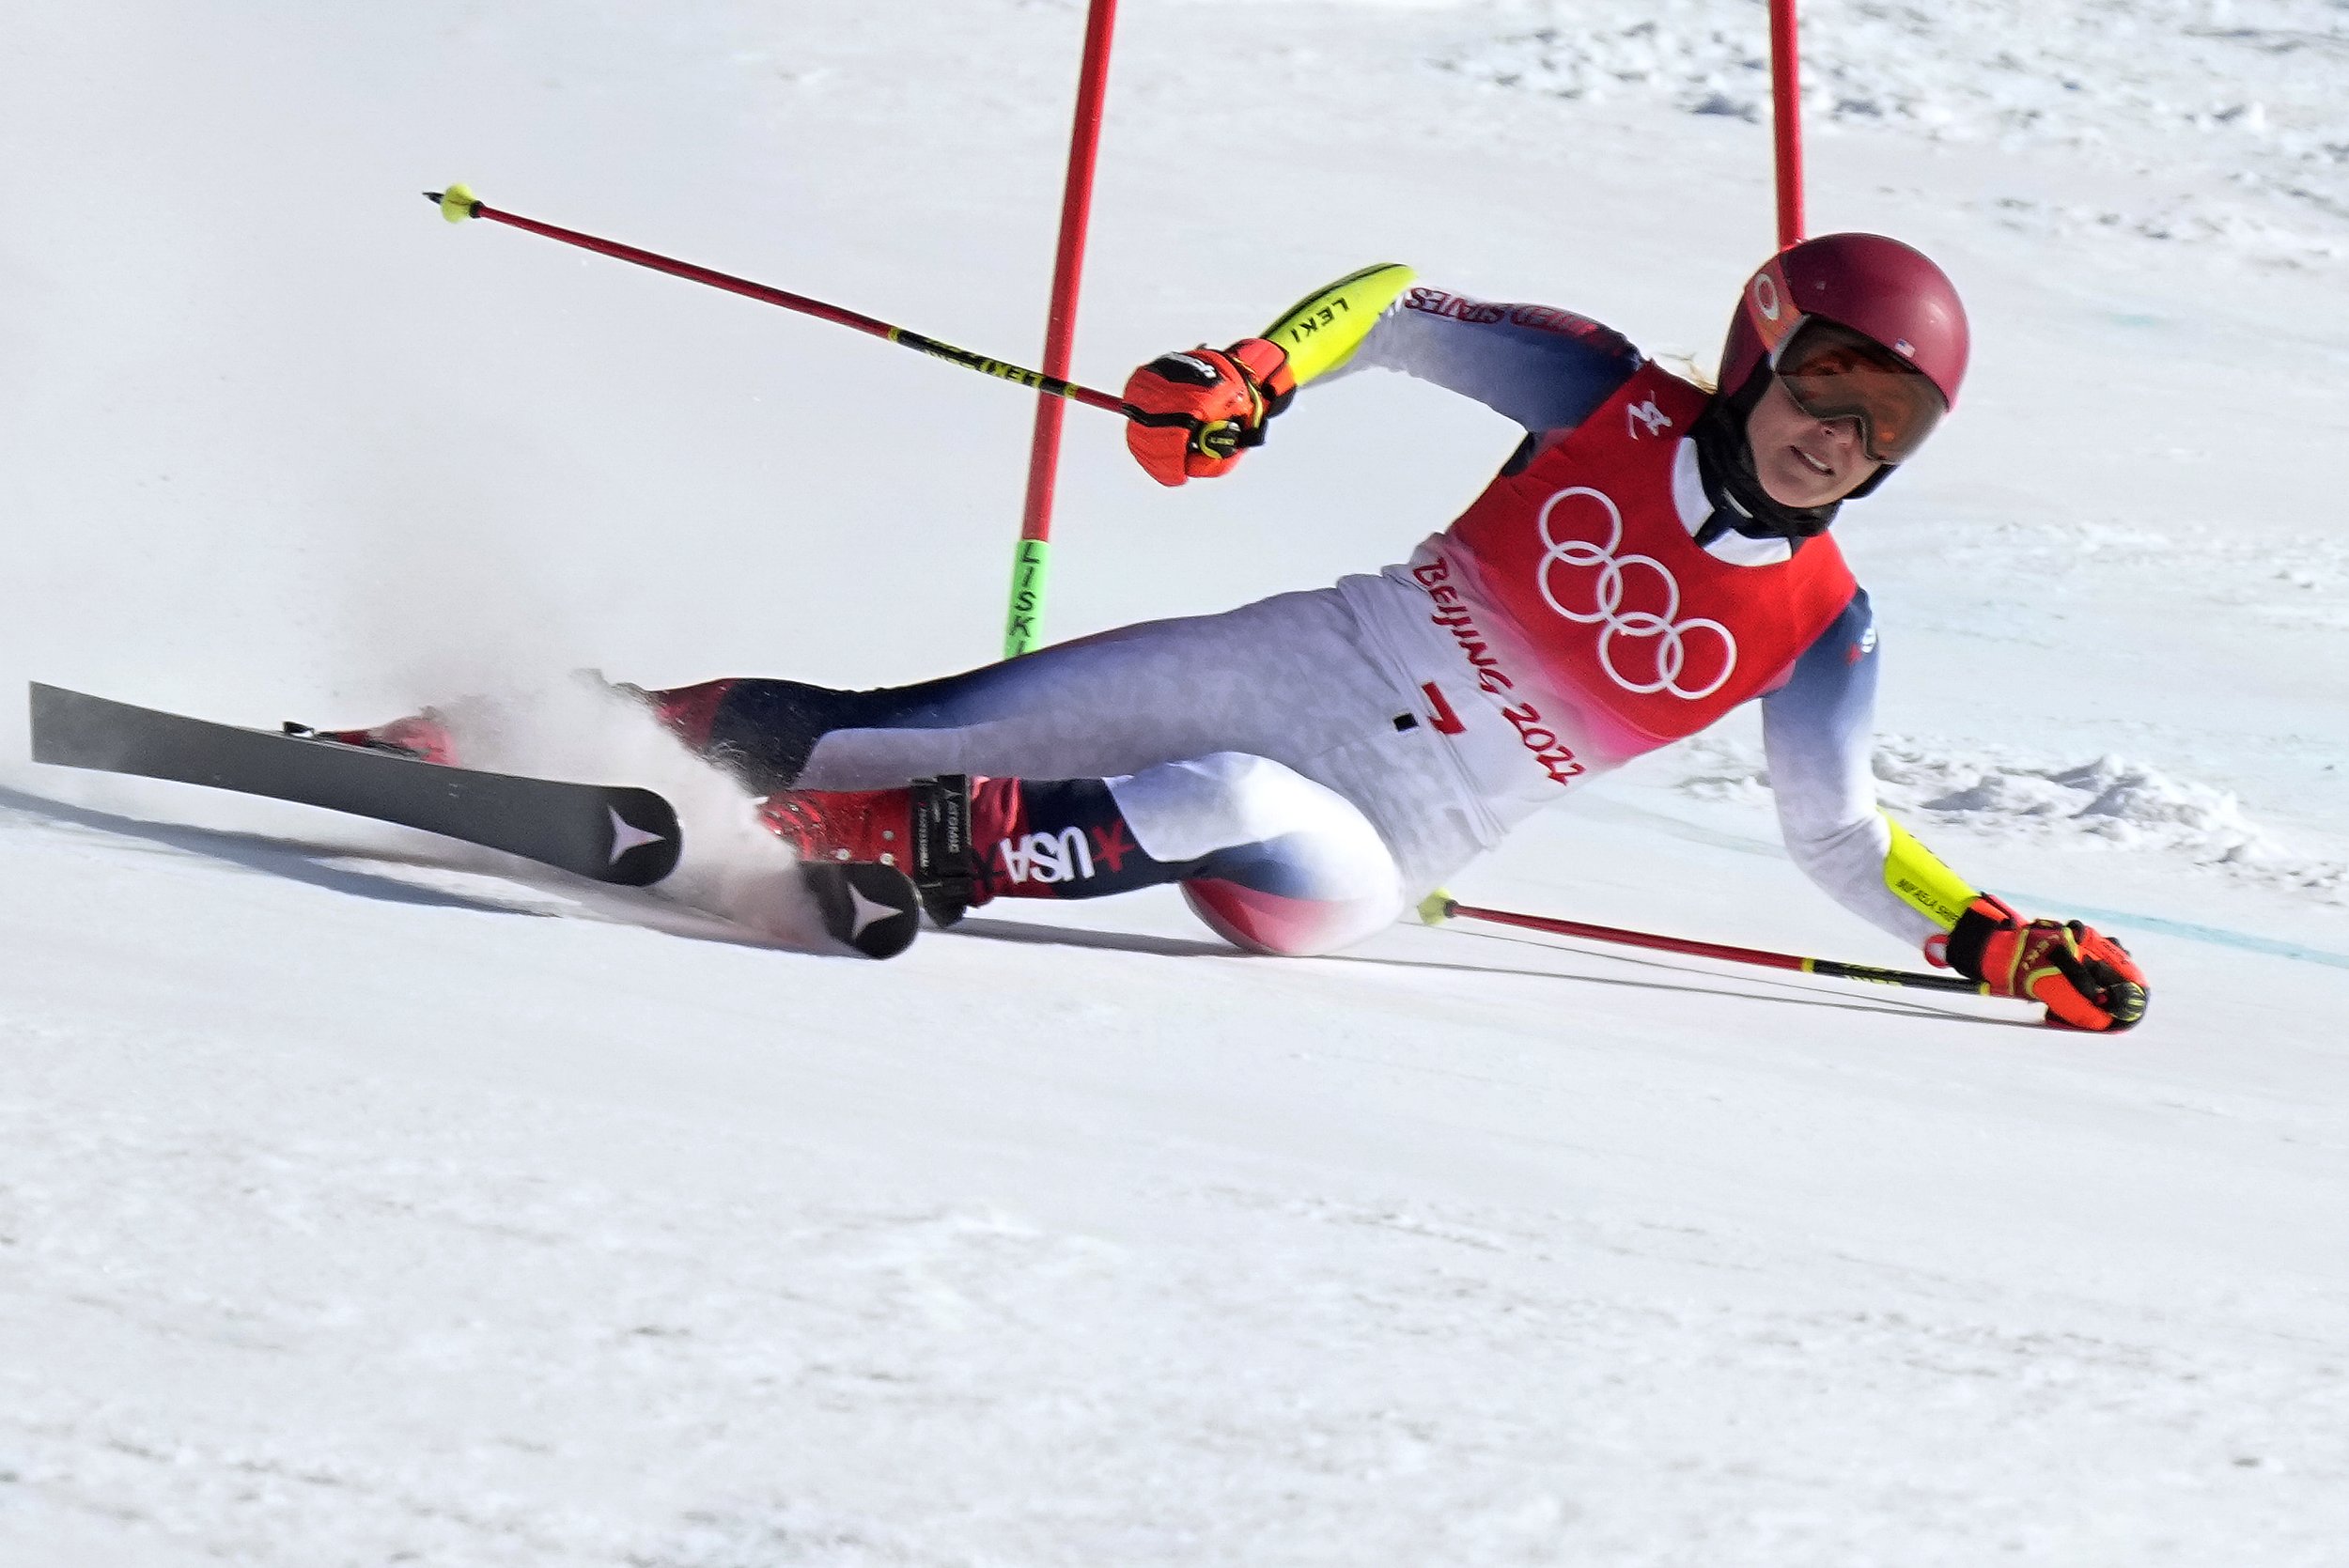  Mikaela Shiffrin of United States loses control and skis off course during the first run of the women's giant slalom at the 2022 Winter Olympics, Monday, Feb. 7, 2022, in the Yanqing district of Beijing. (AP Photo/Robert F. Bukaty) 